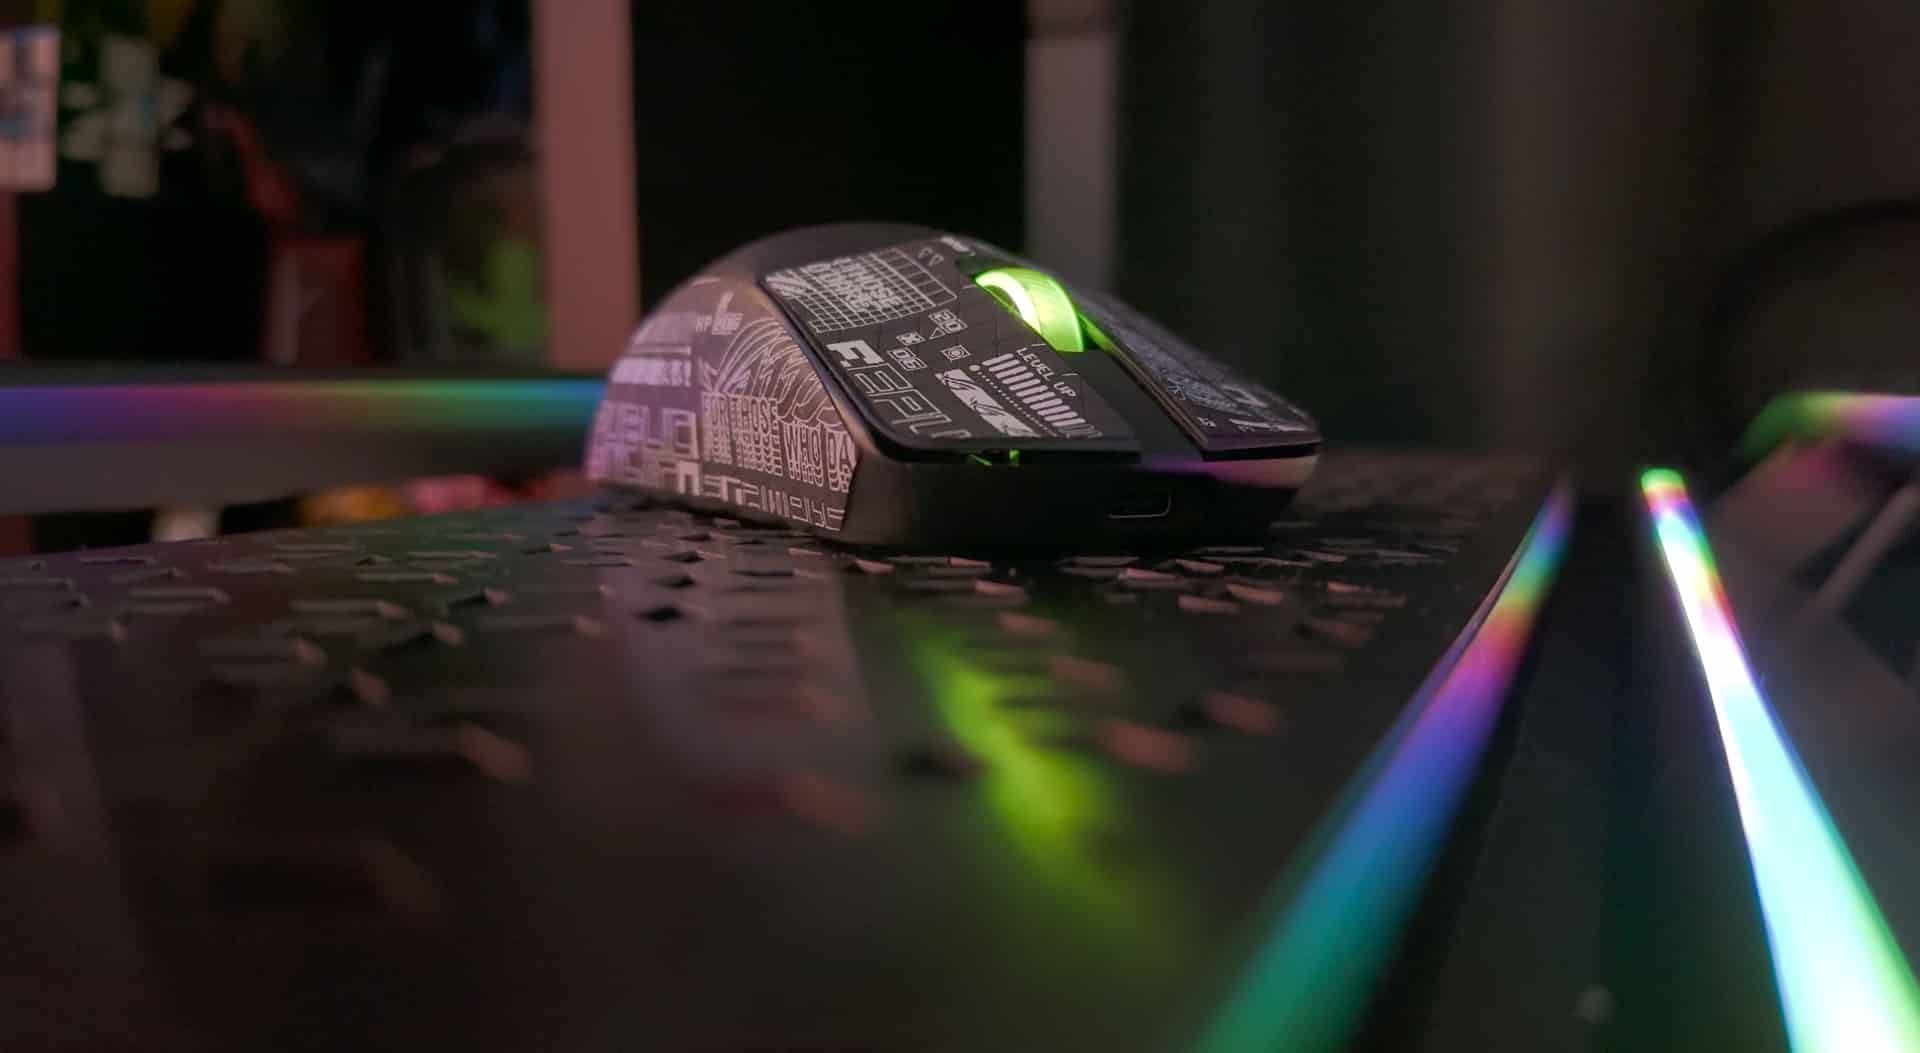 How To Calibrate Your Mouse Pad